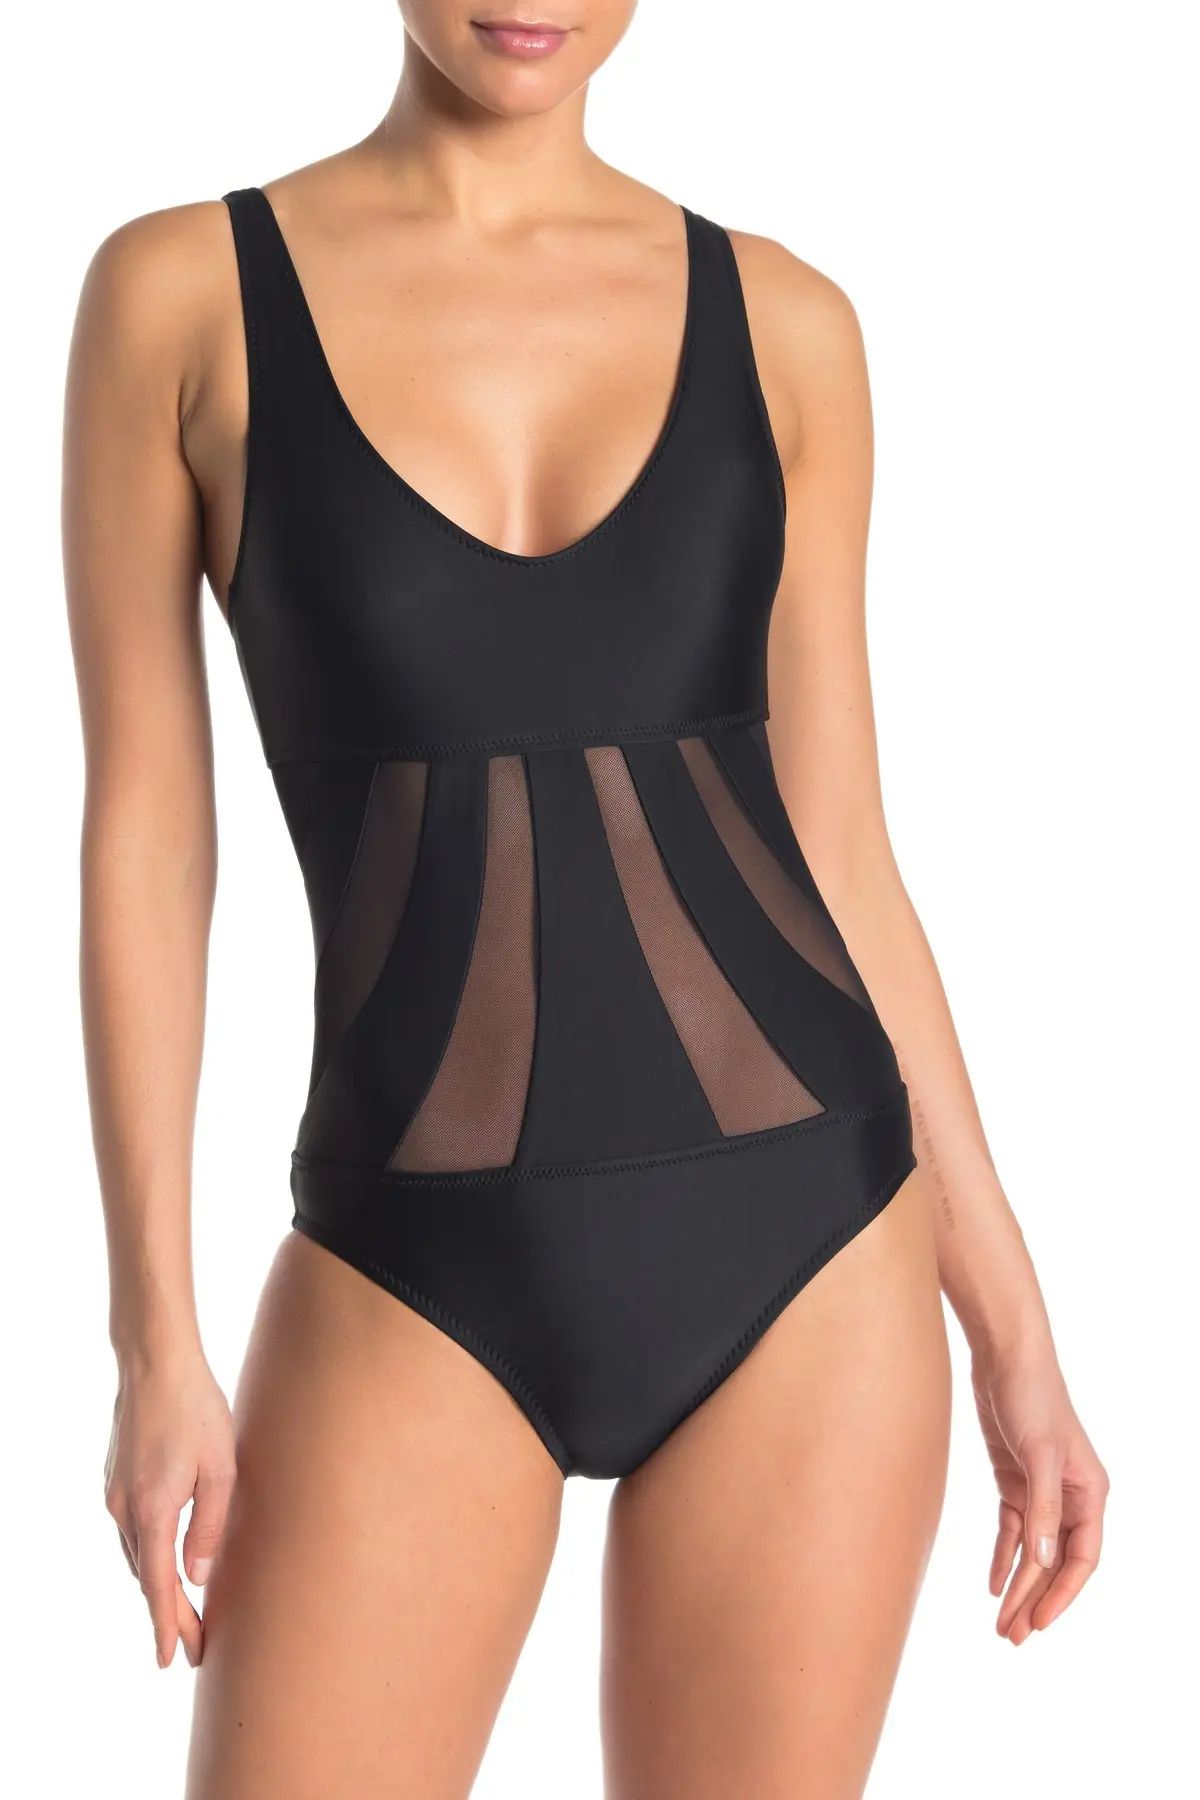 Mossimo Del Mar Mesh Cutout One-Piece Swimsuit at Nordstrom Rack | Nordstrom Rack